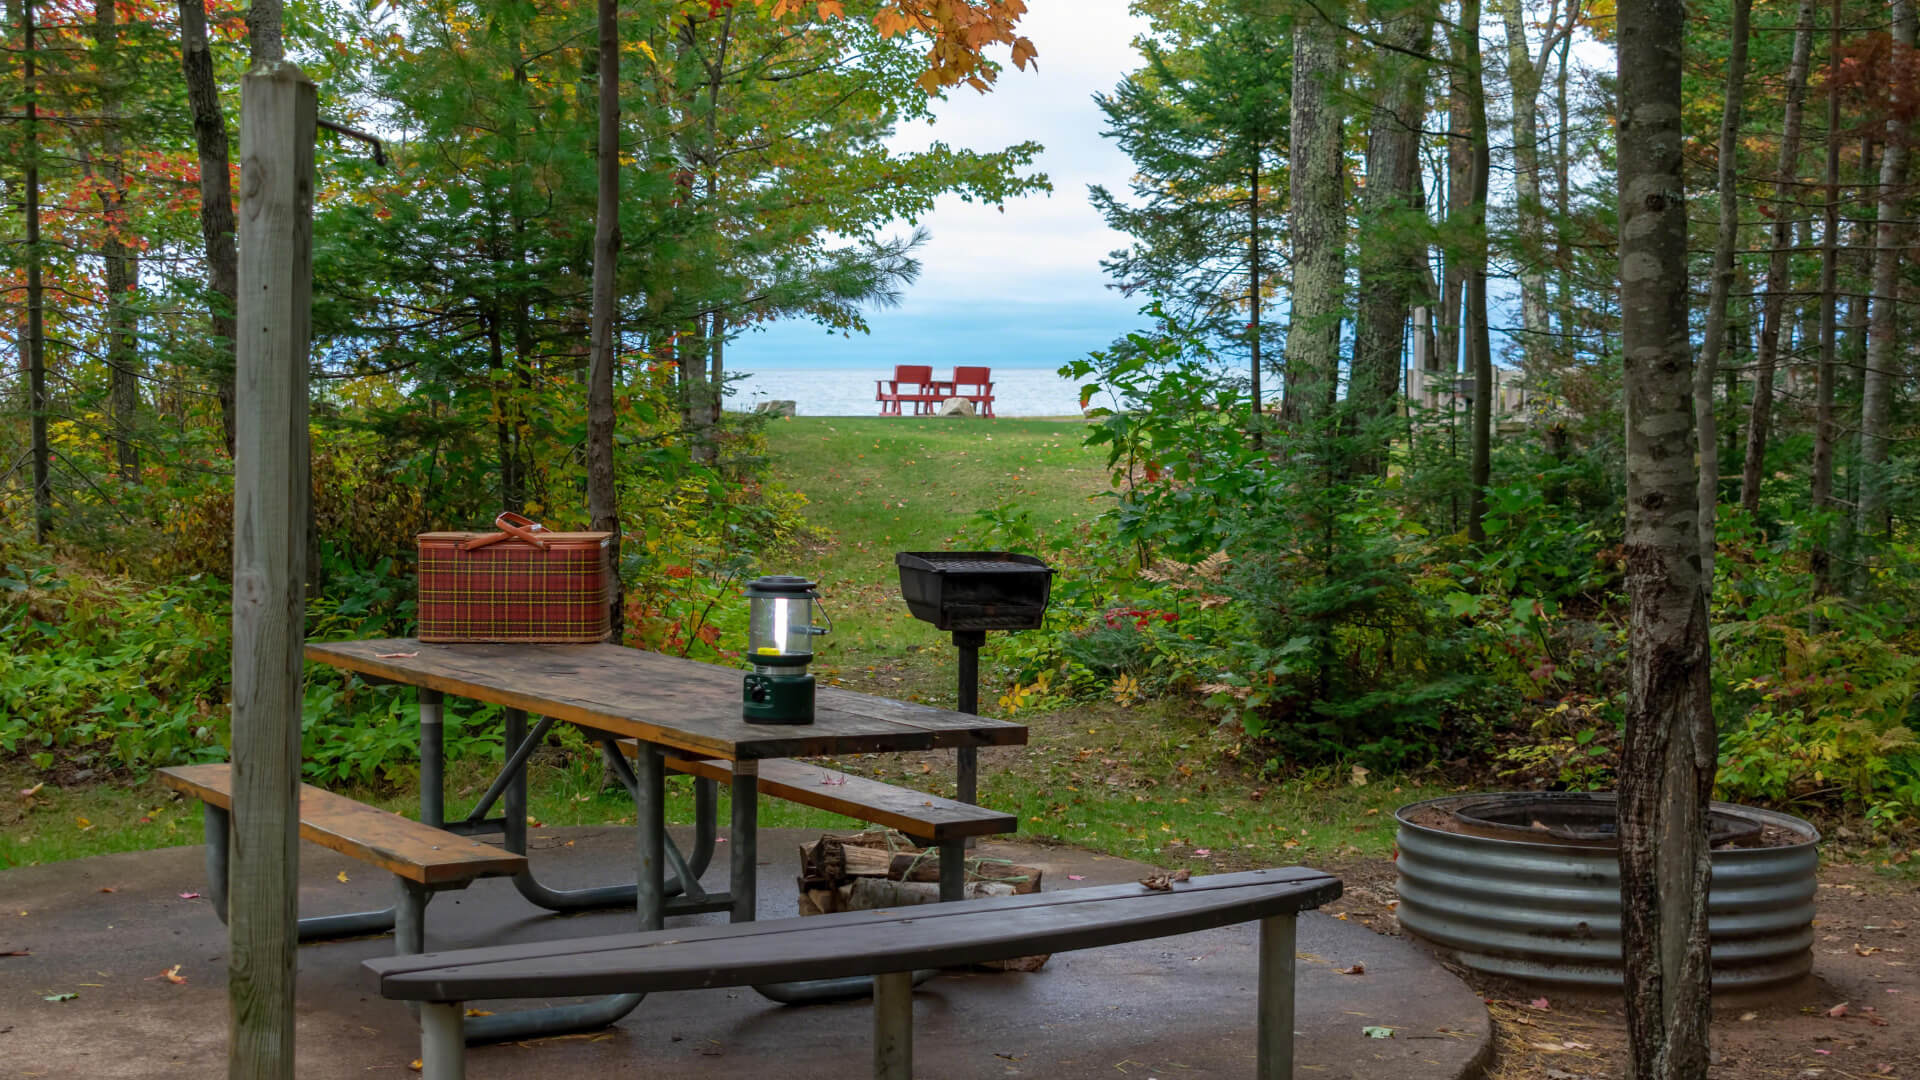 Lake Michigan Camping: Embracing Nature’s Beauty on the Shores